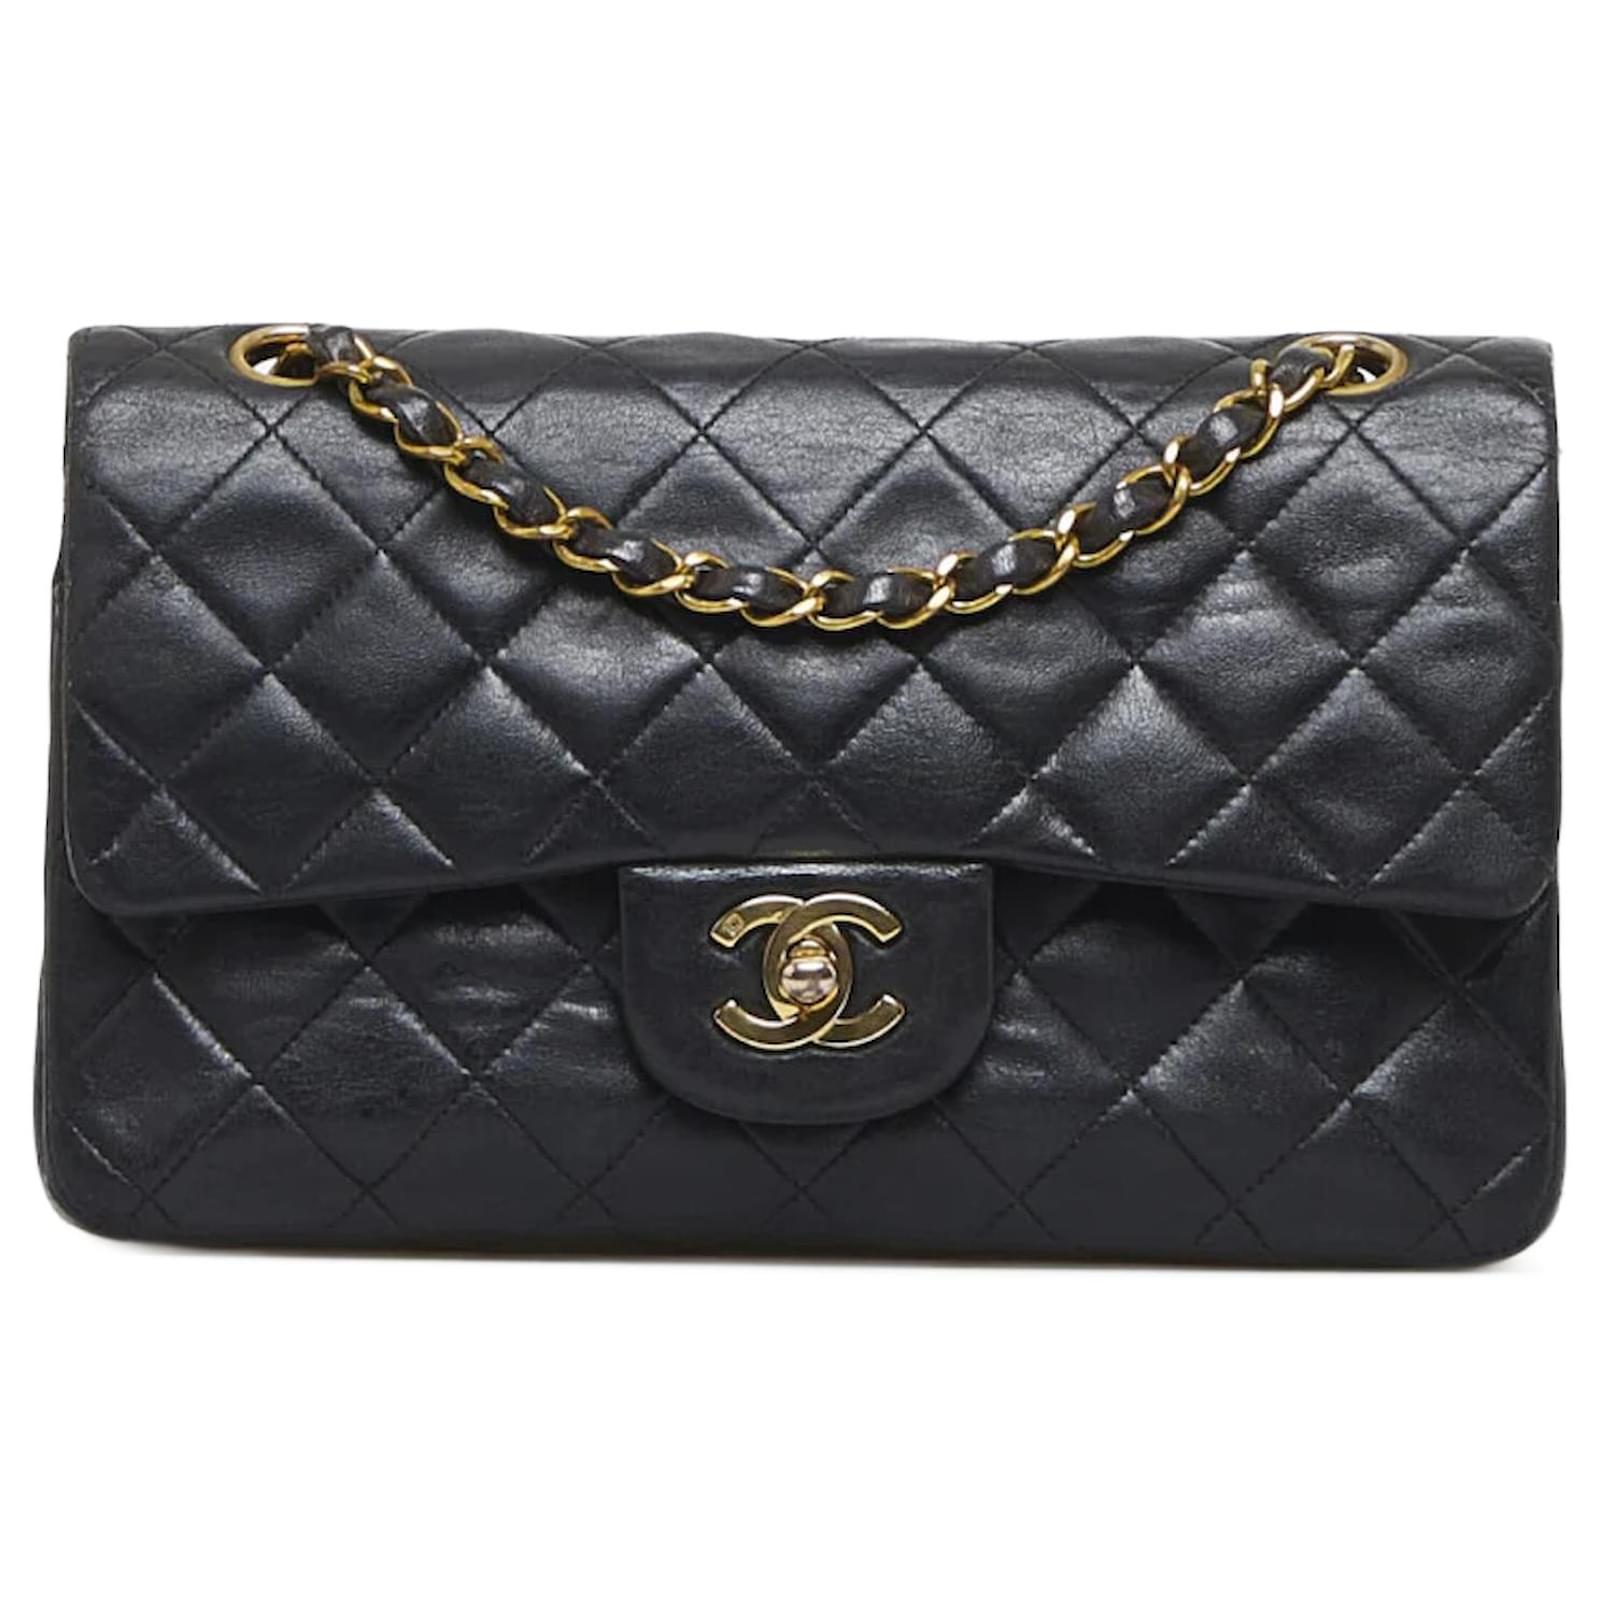 Chanel Small Classic Double Flap Bag - Black Shoulder Bags